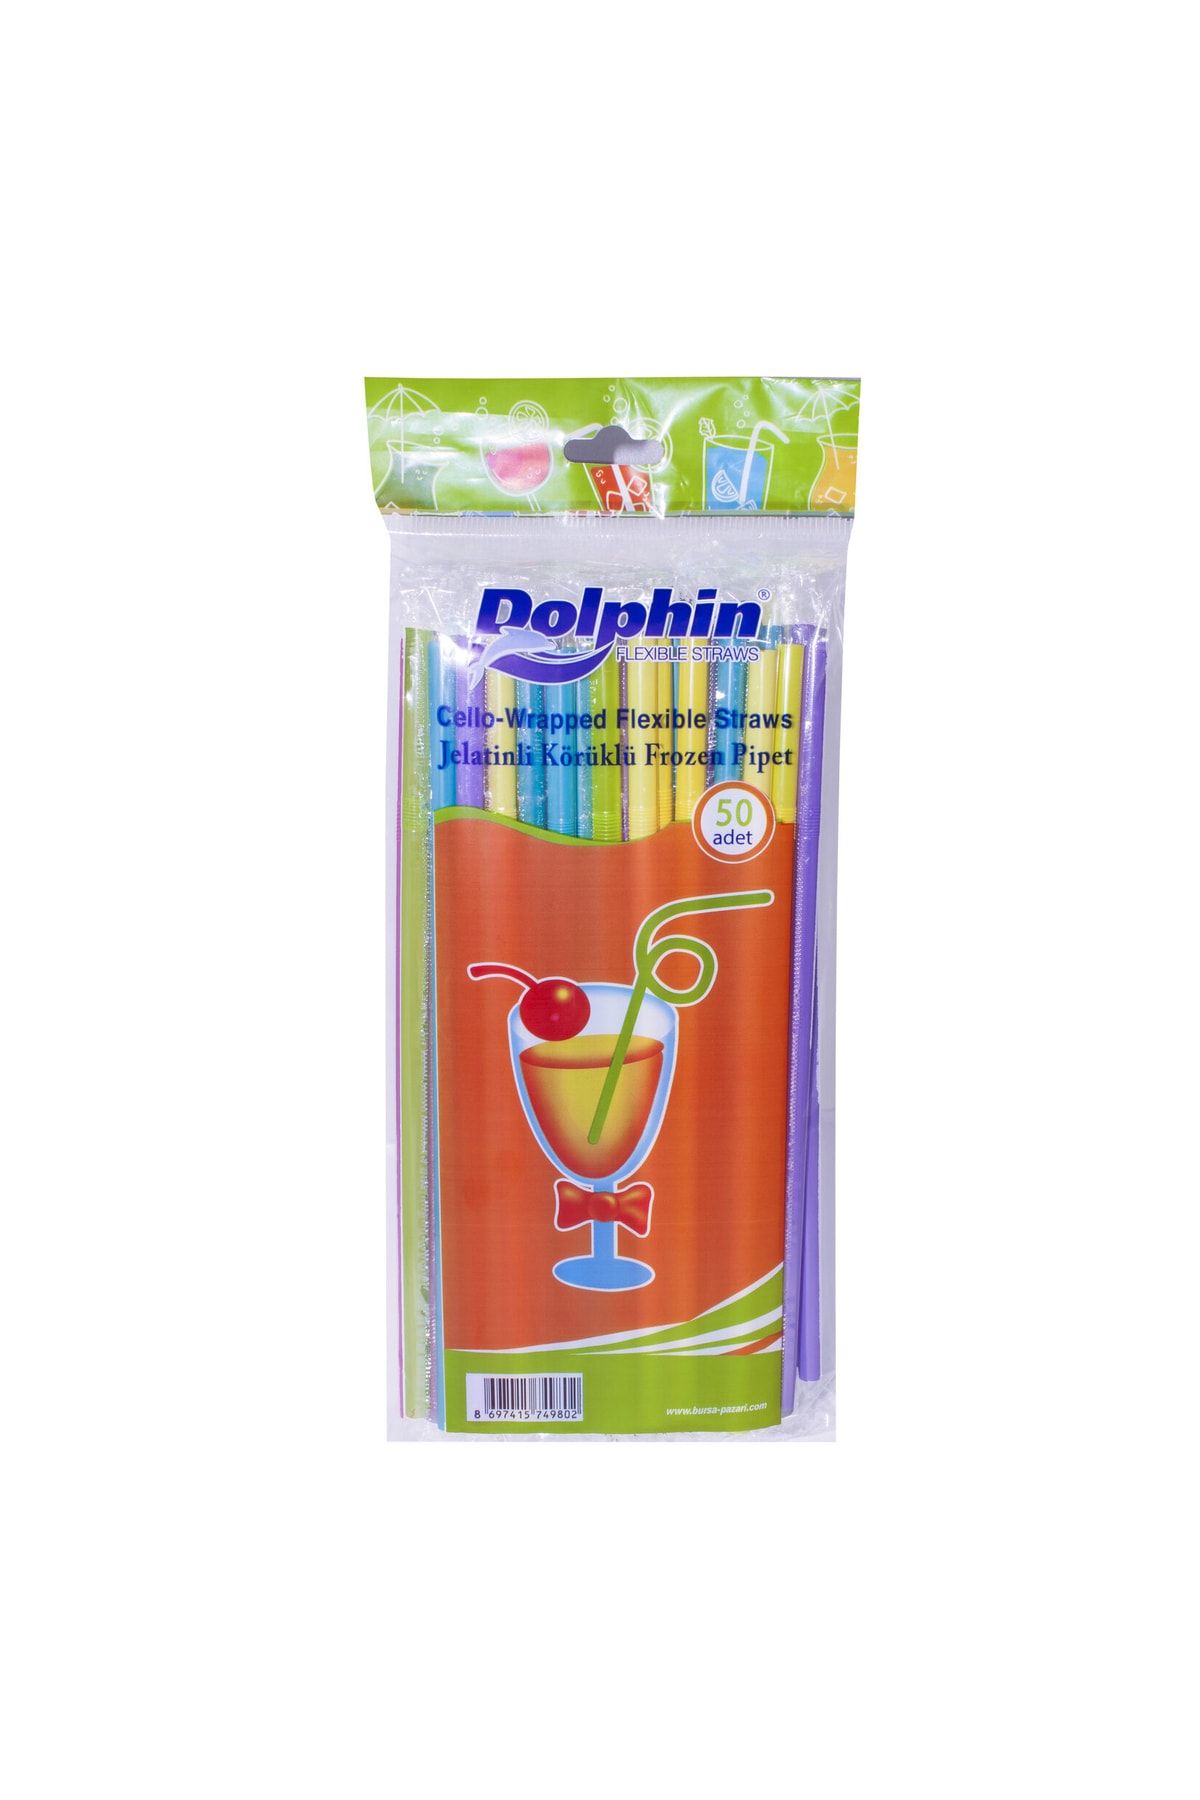 Dolphin Pipet